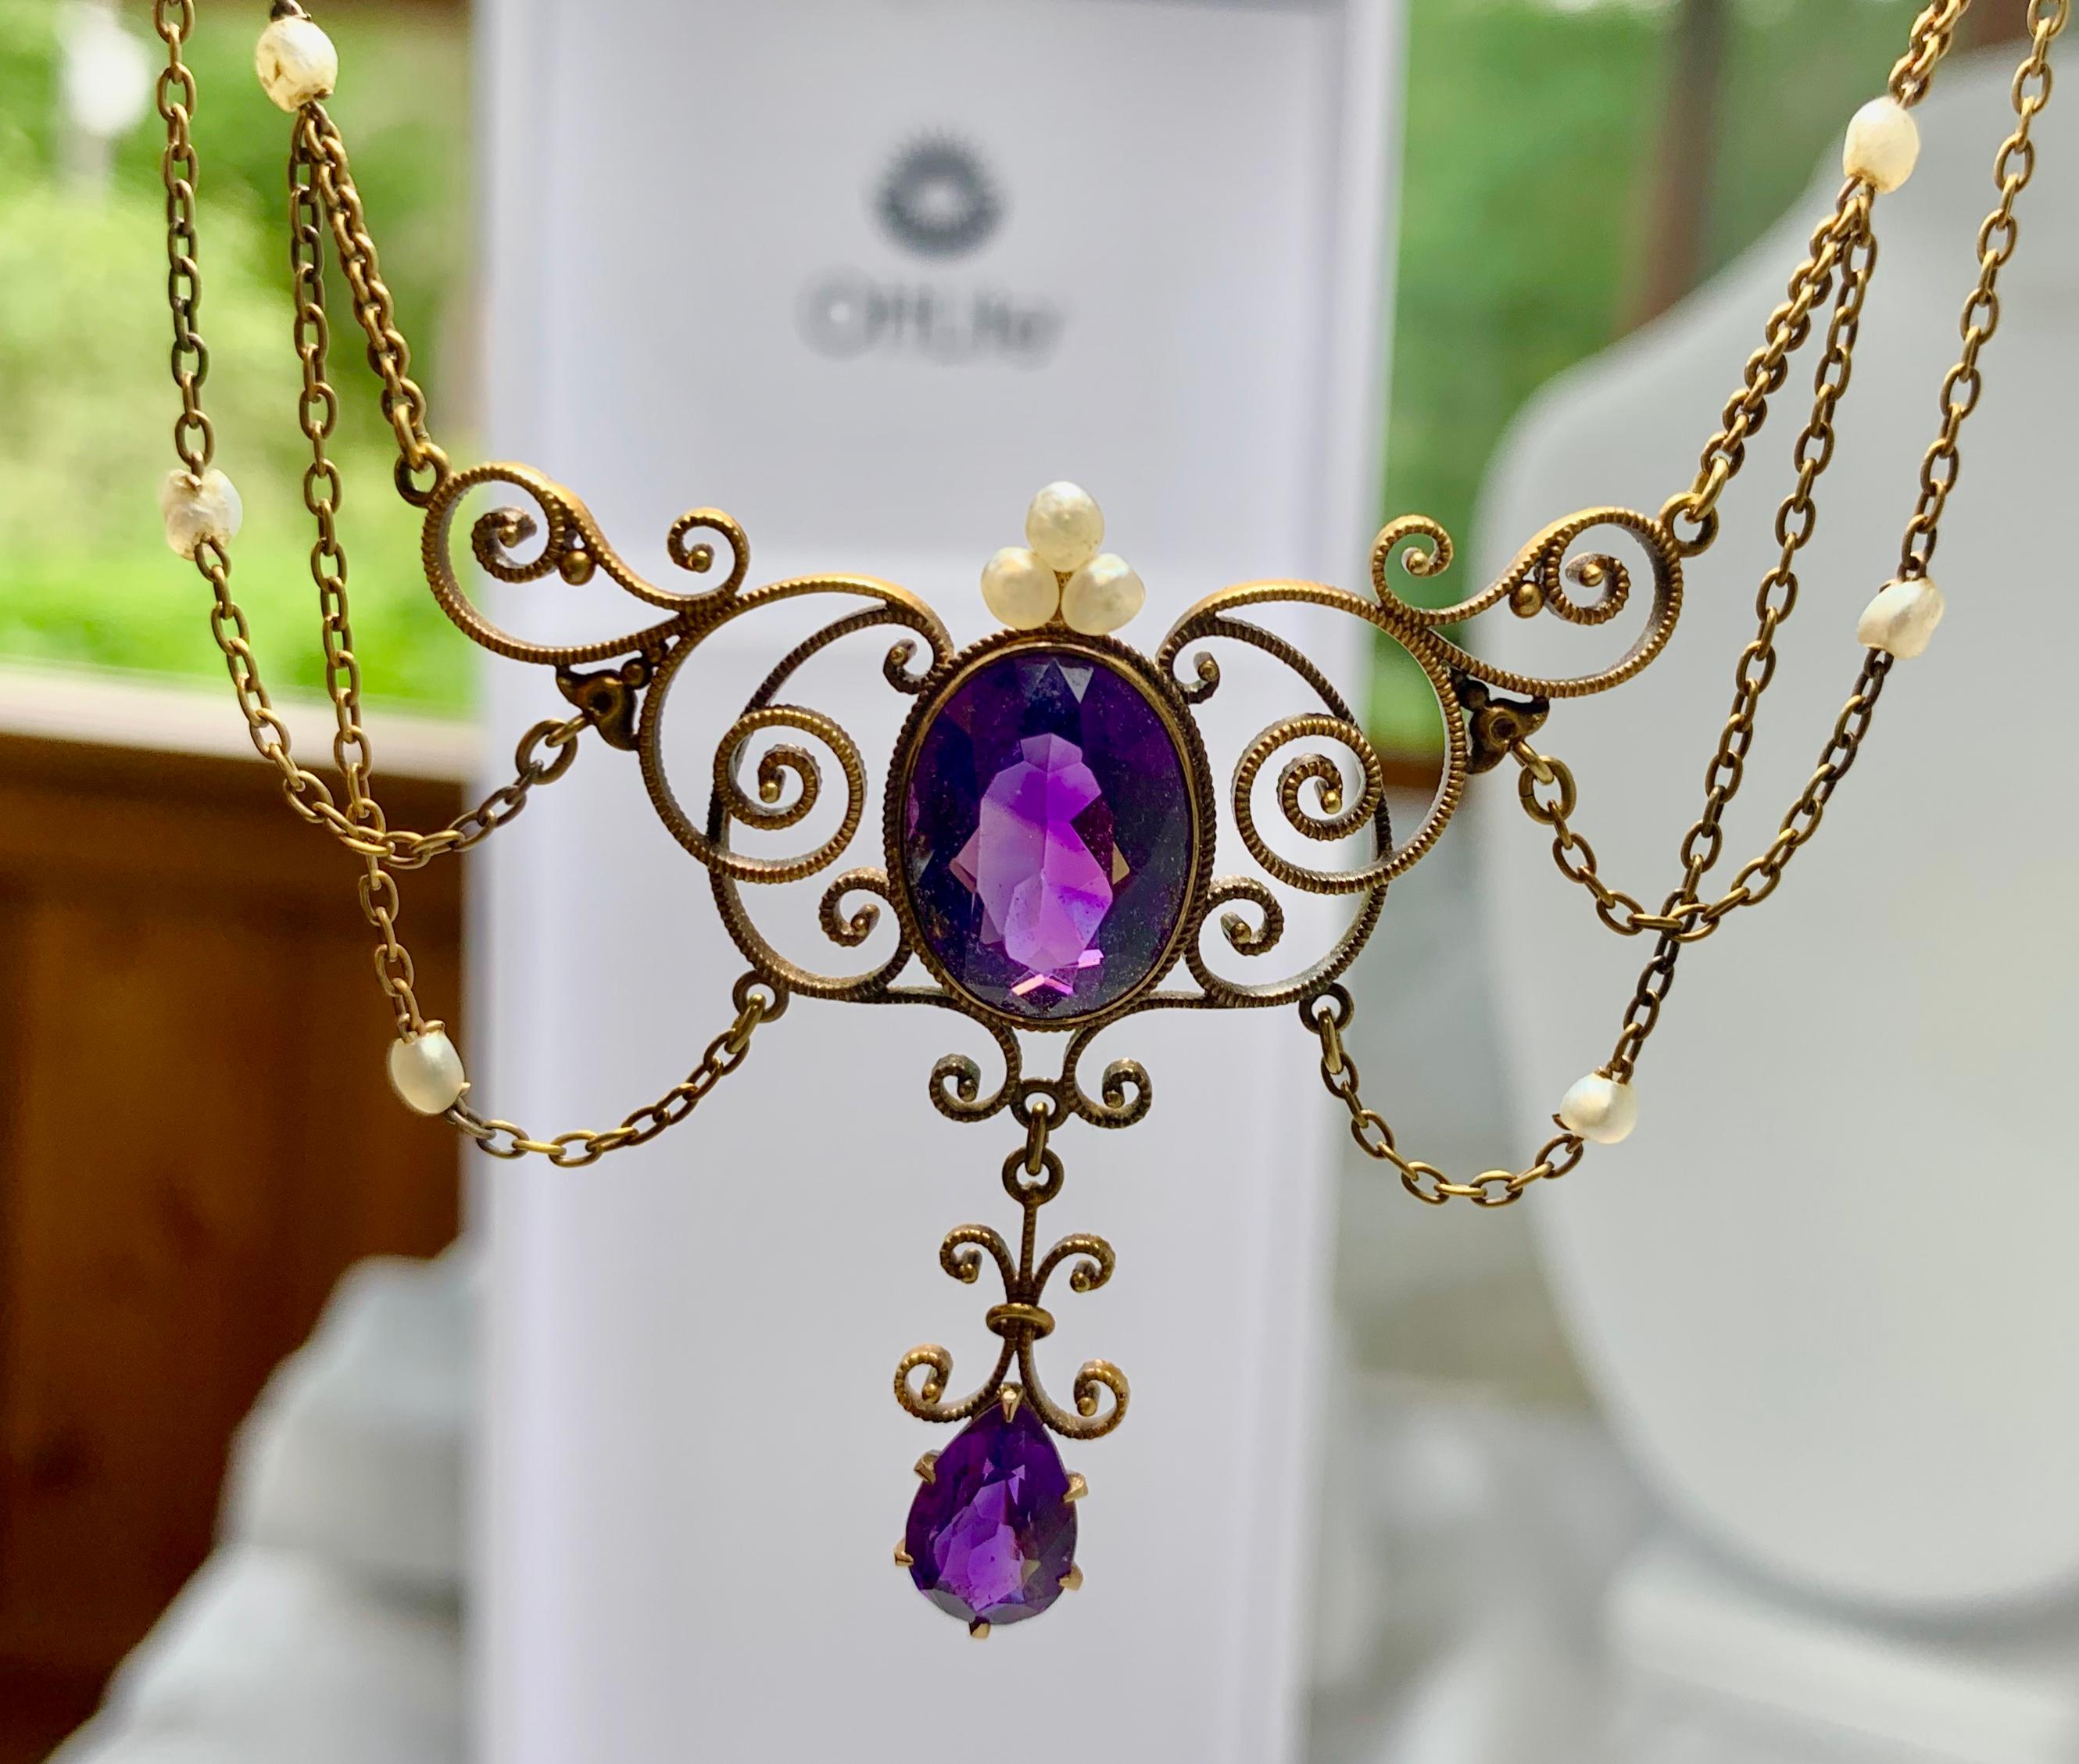 A STUNNING VICTORIAN - ART NOUVEAU - BELLE EPOQUE FESTOON NECKLACE WITH THE MOST GORGEOUS NATURAL OVAL SIBERIAN AMETHYST GEMS SET IN A GORGEOUS FILIGREE SETTING WITH SEED PEARLS IN AN OPEN WORK FESTOON SWAG DESIGN IN 14 KARAT ROSE GOLD DATING TO